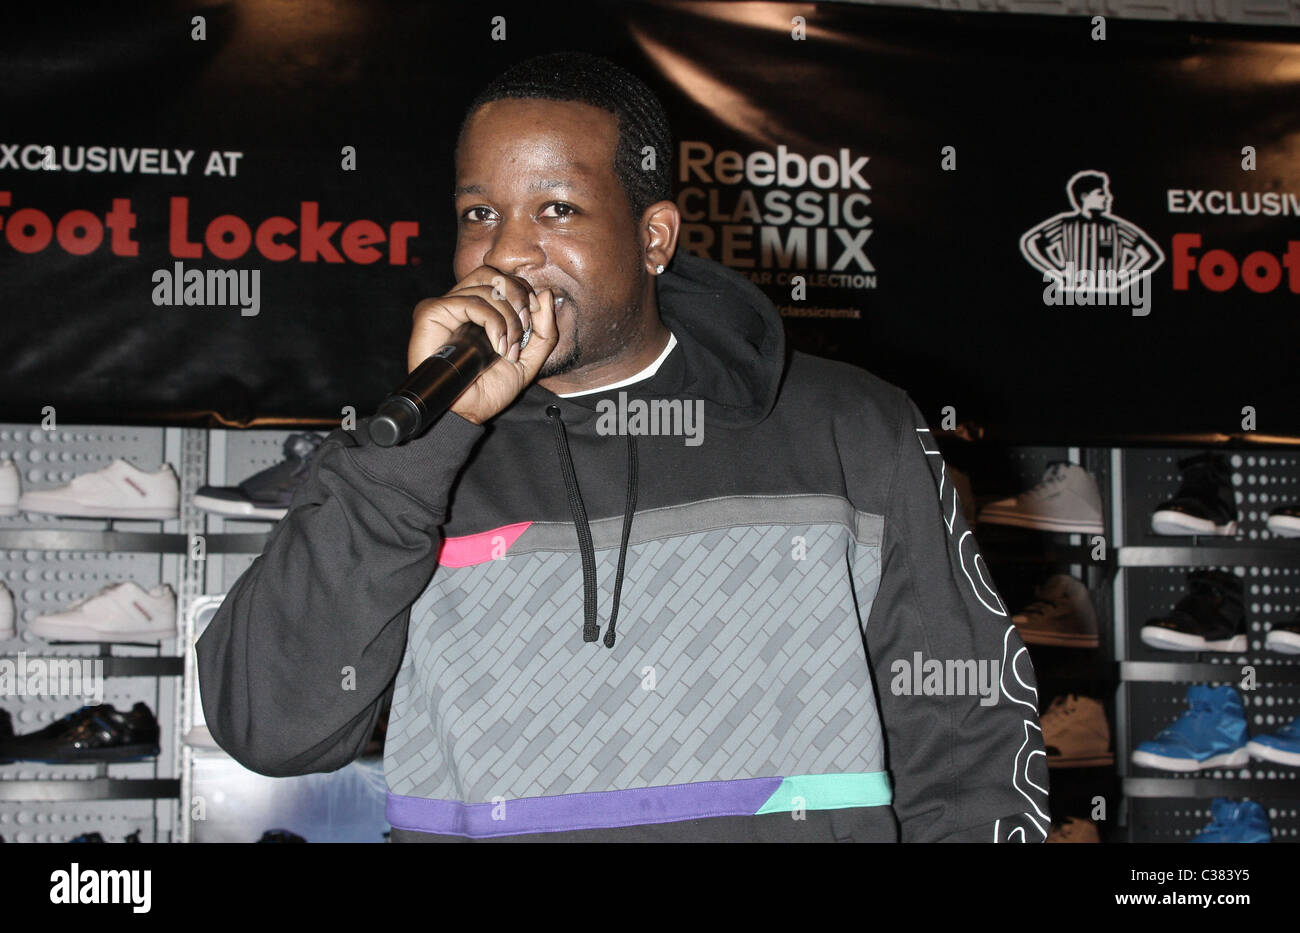 Jabari Evans aka Naledge Kidz in the Hall launch the Reebok Classic Remix  Collection with a performance at Foot Locker Times Stock Photo - Alamy